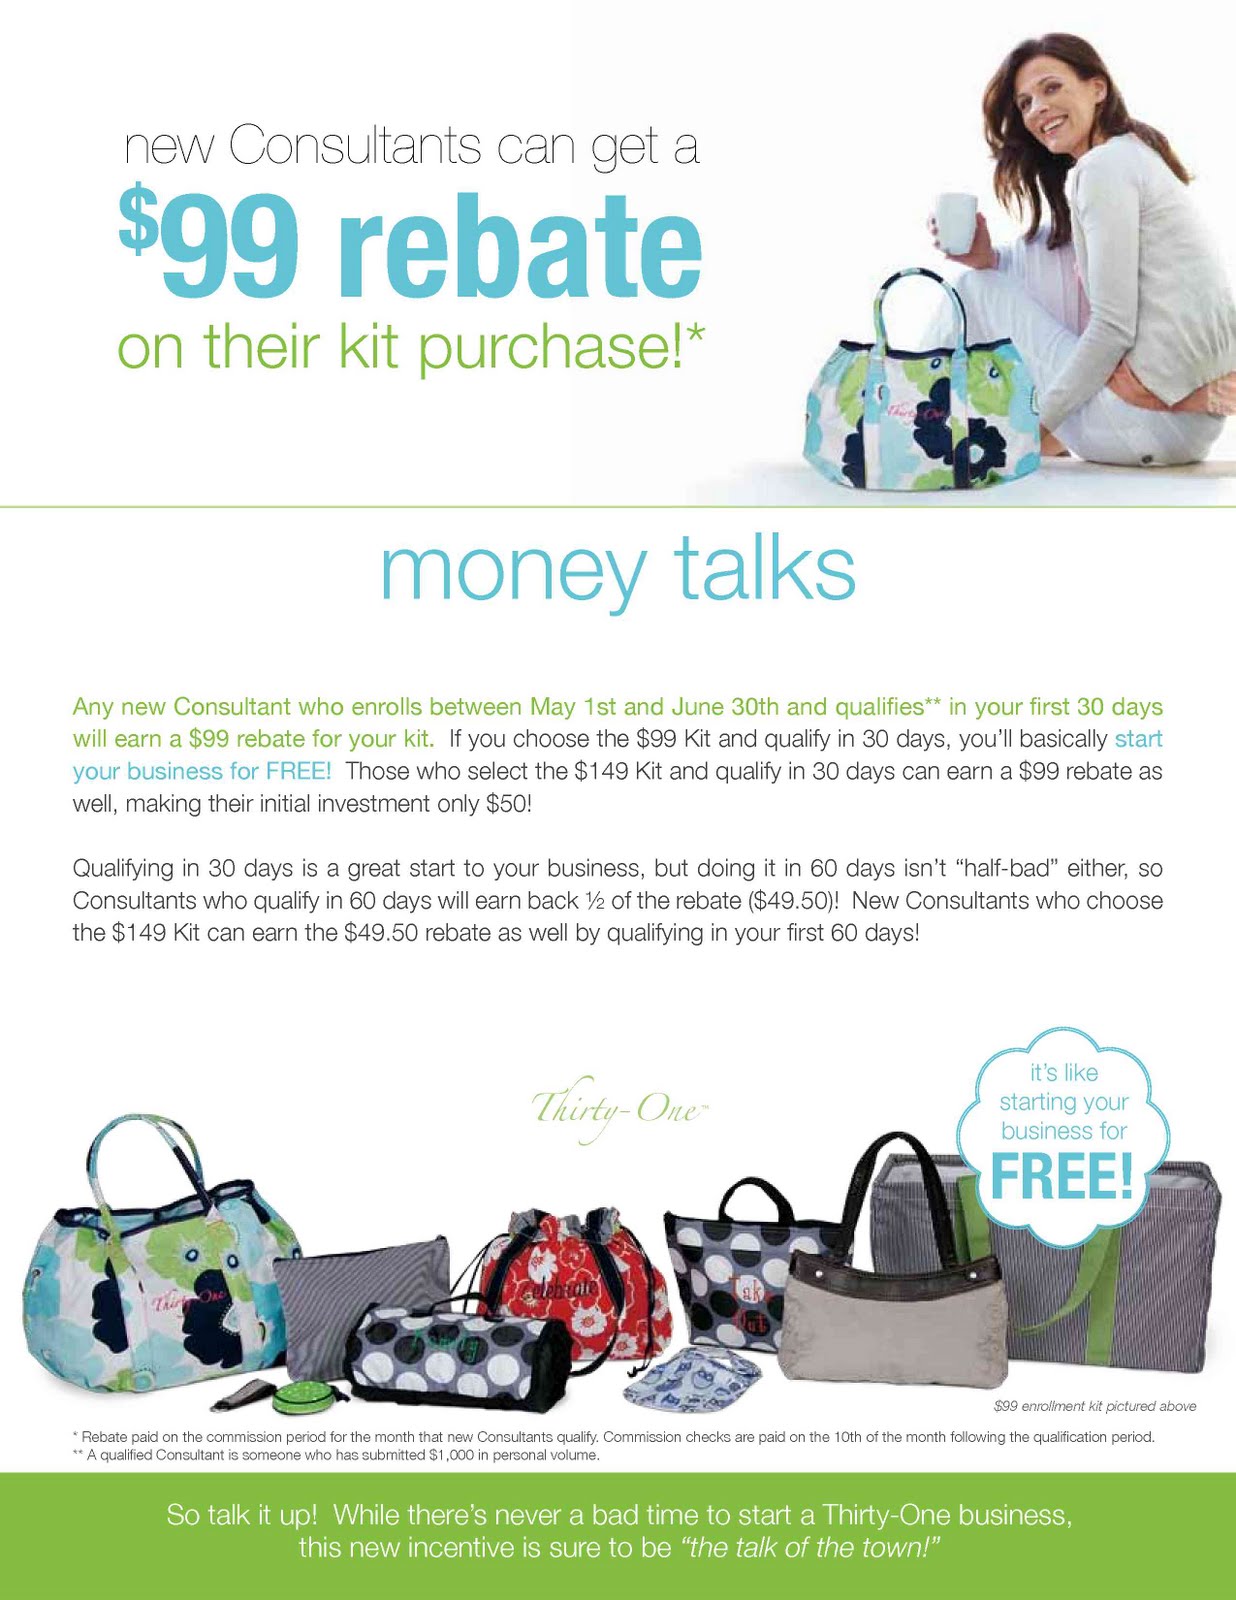 Join Thirty-One for FREE!